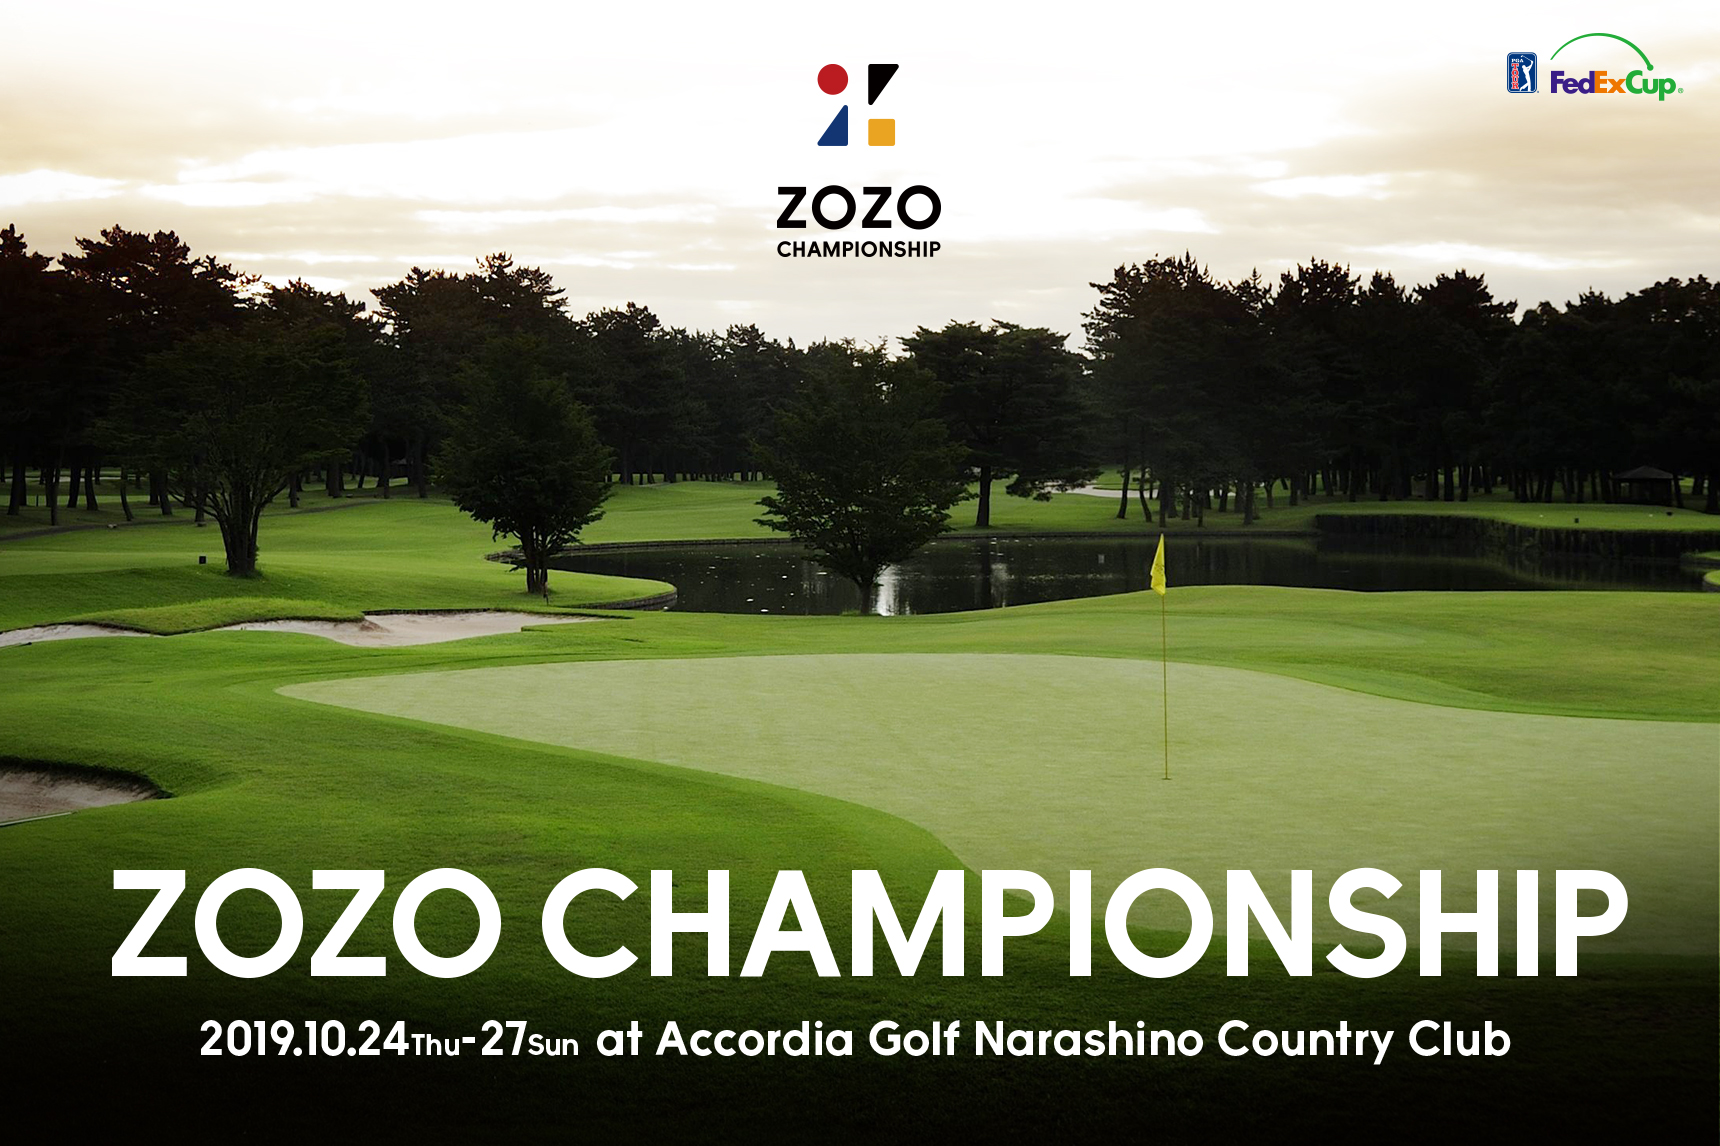 The “ZOZO CHAMPIONSHIP”, a PGA TOUR Tournament Hosted by ZOZO, Inc This Fall, Will Begin Ticket Sales Lottery On July 23rd 600 PM.